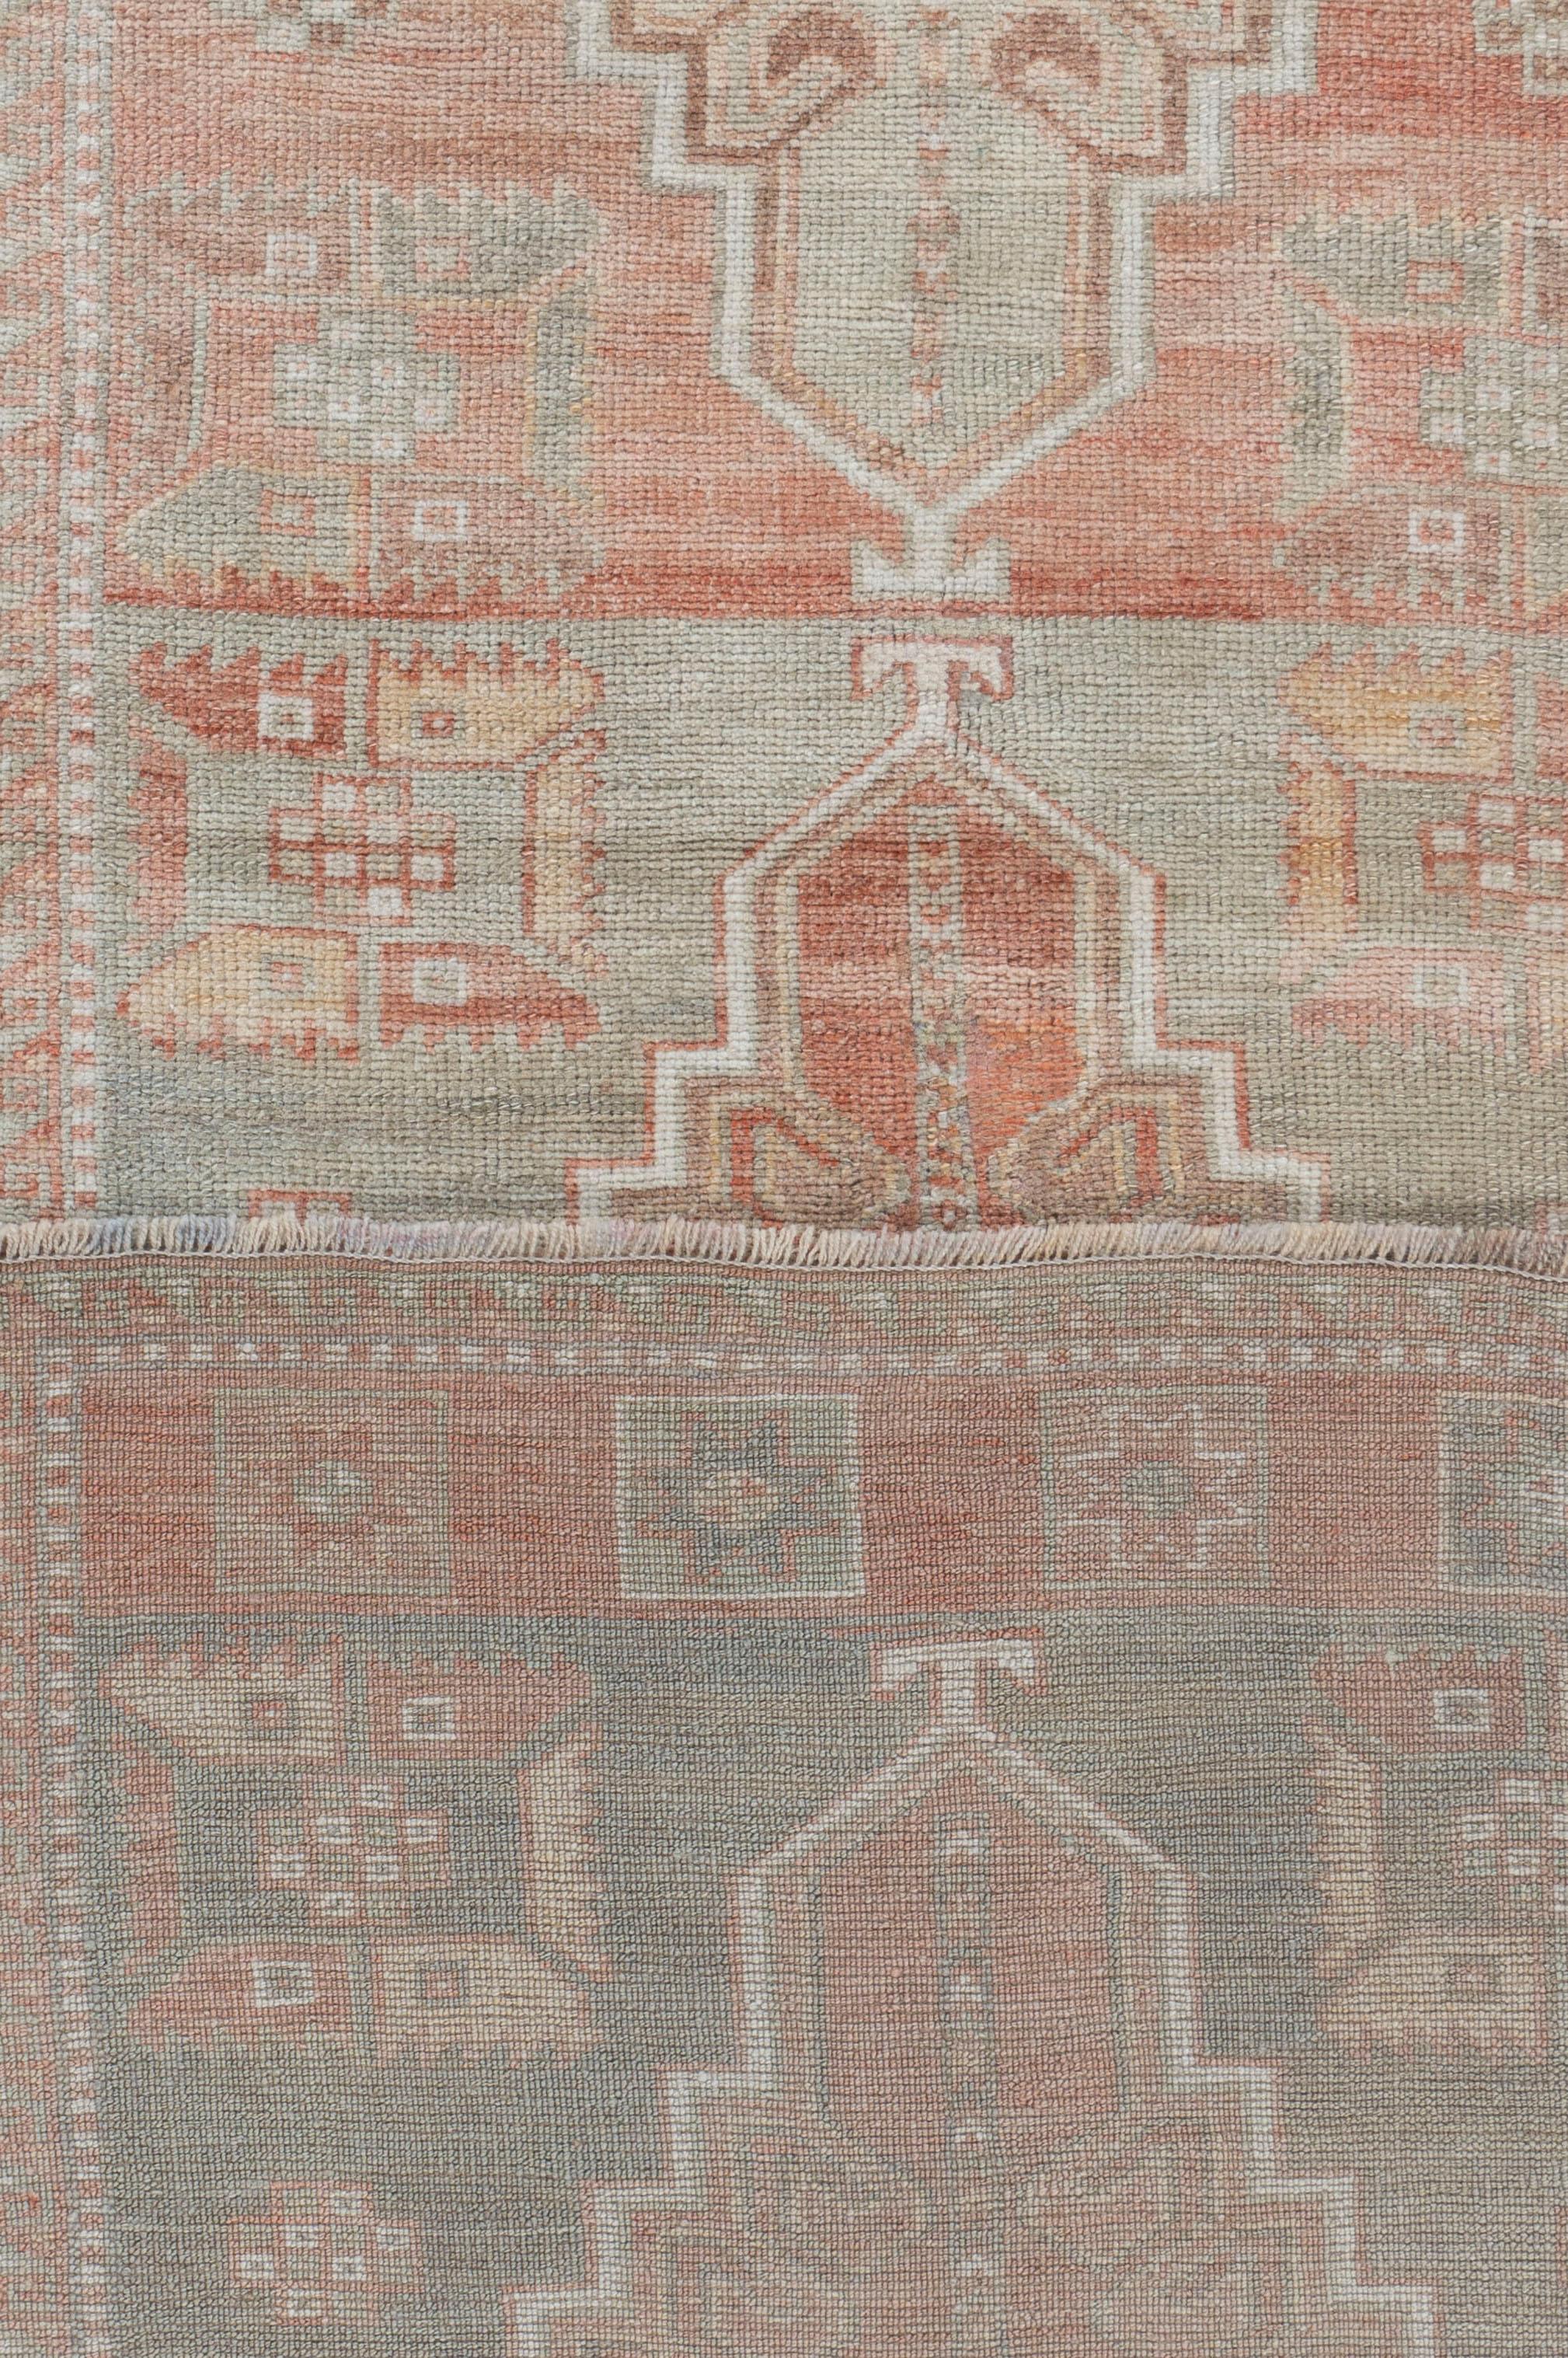 Vintage Turkish Oushak Runner 2'1 X 8'11. Even today, Oushak rugs are still the first choice of professional interior designers. Sometimes this is because when grading Oushak carpets, carpet connoisseurs will not only look at the overall quality of